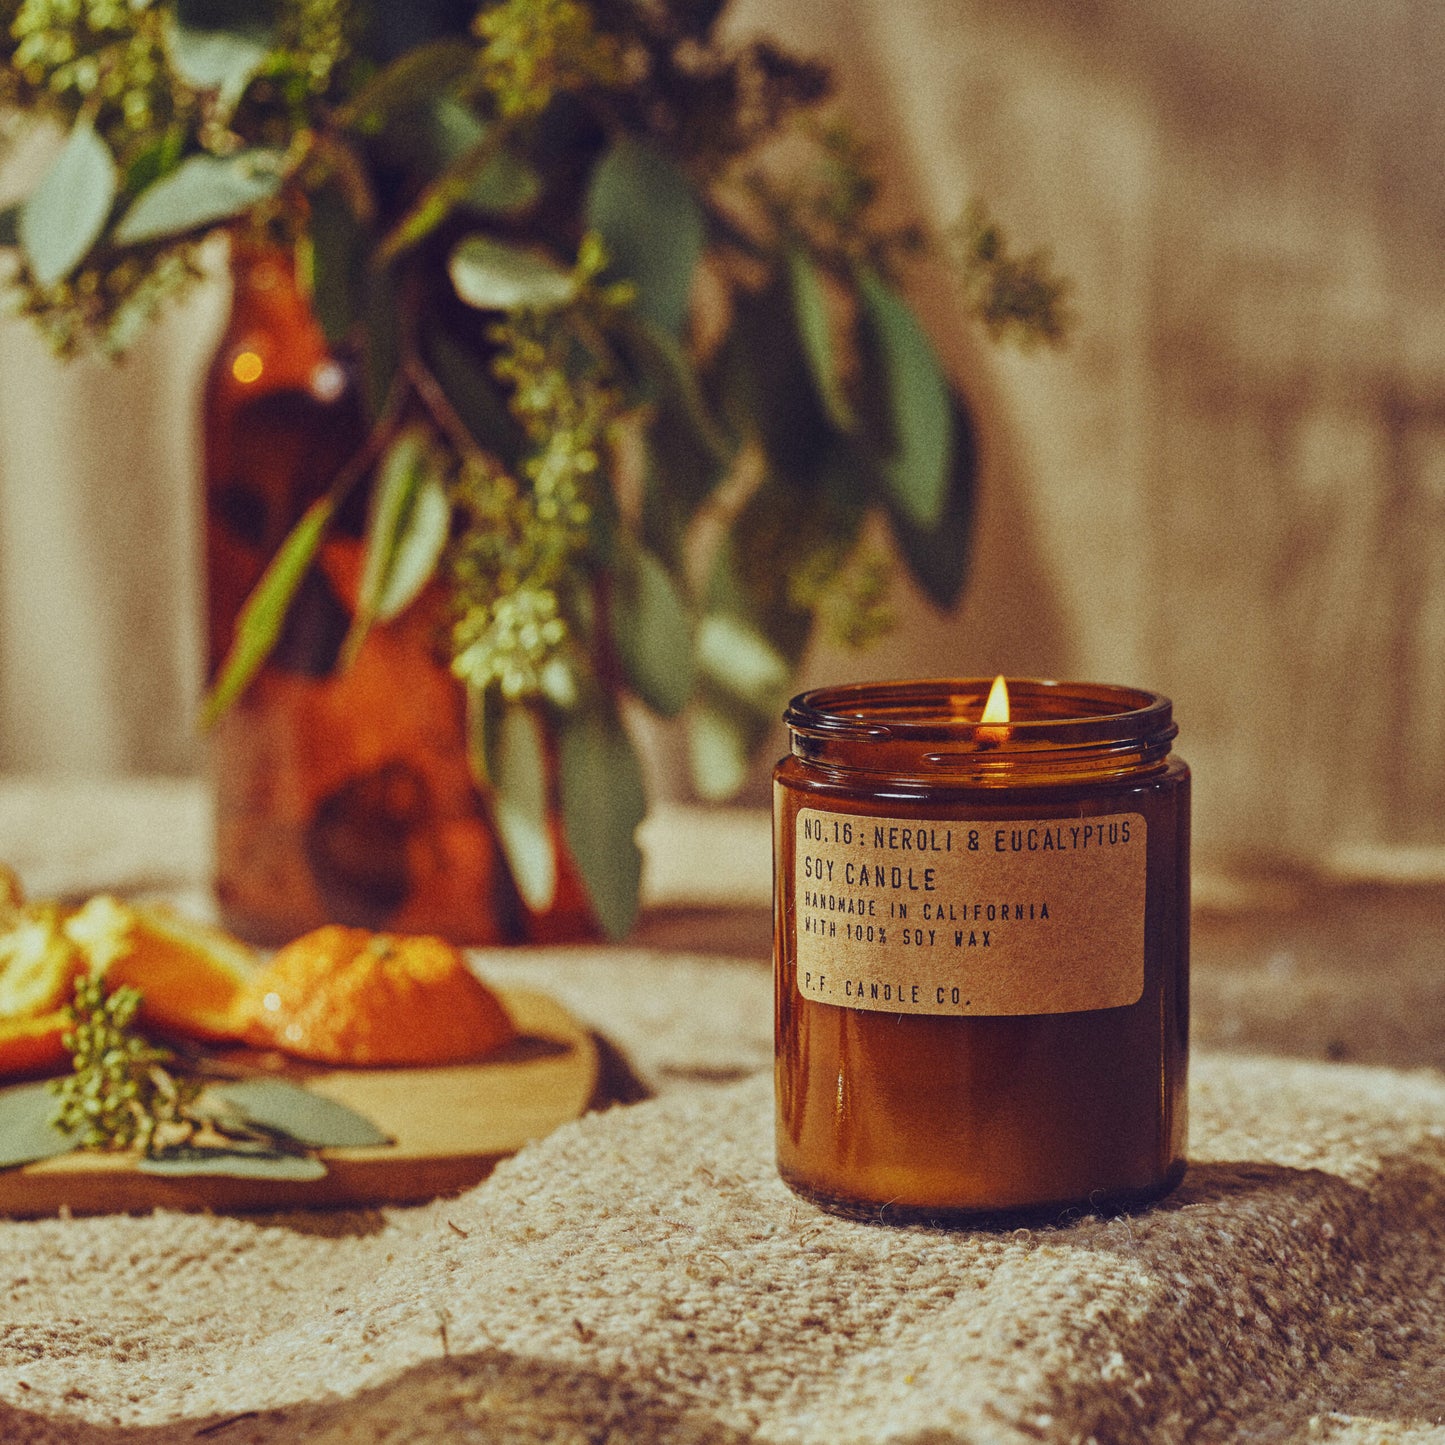 P.F. Candle Co. Neroli & Eucalyptus Scented Candle - Osmology Scented Candles & Home Fragrance